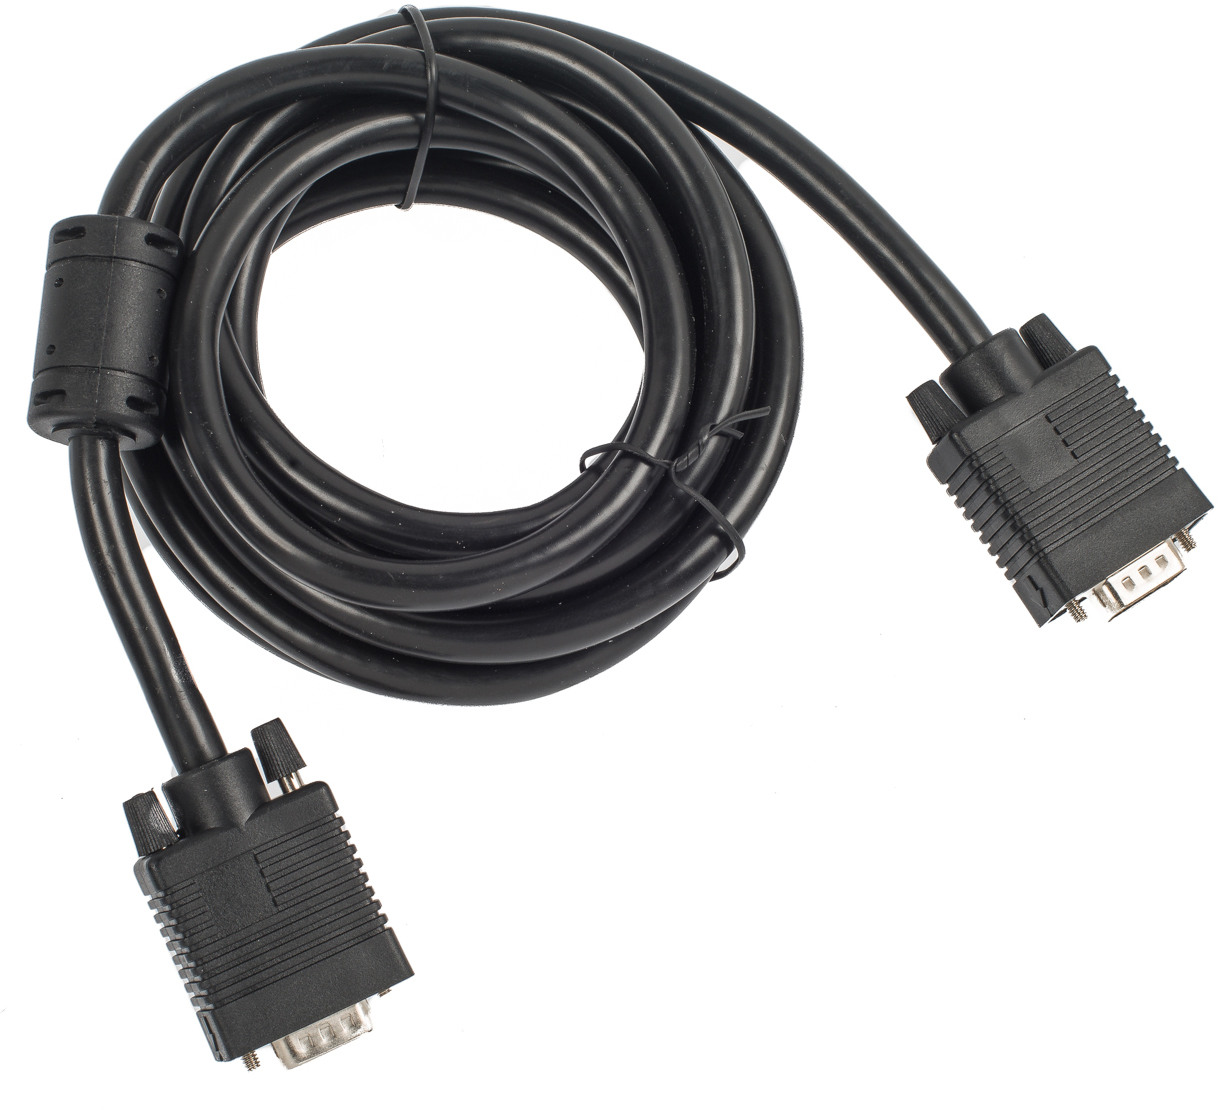 LINK2GO VGA Monitorcable, HD14 VG1013MBB male/male, 3.0m